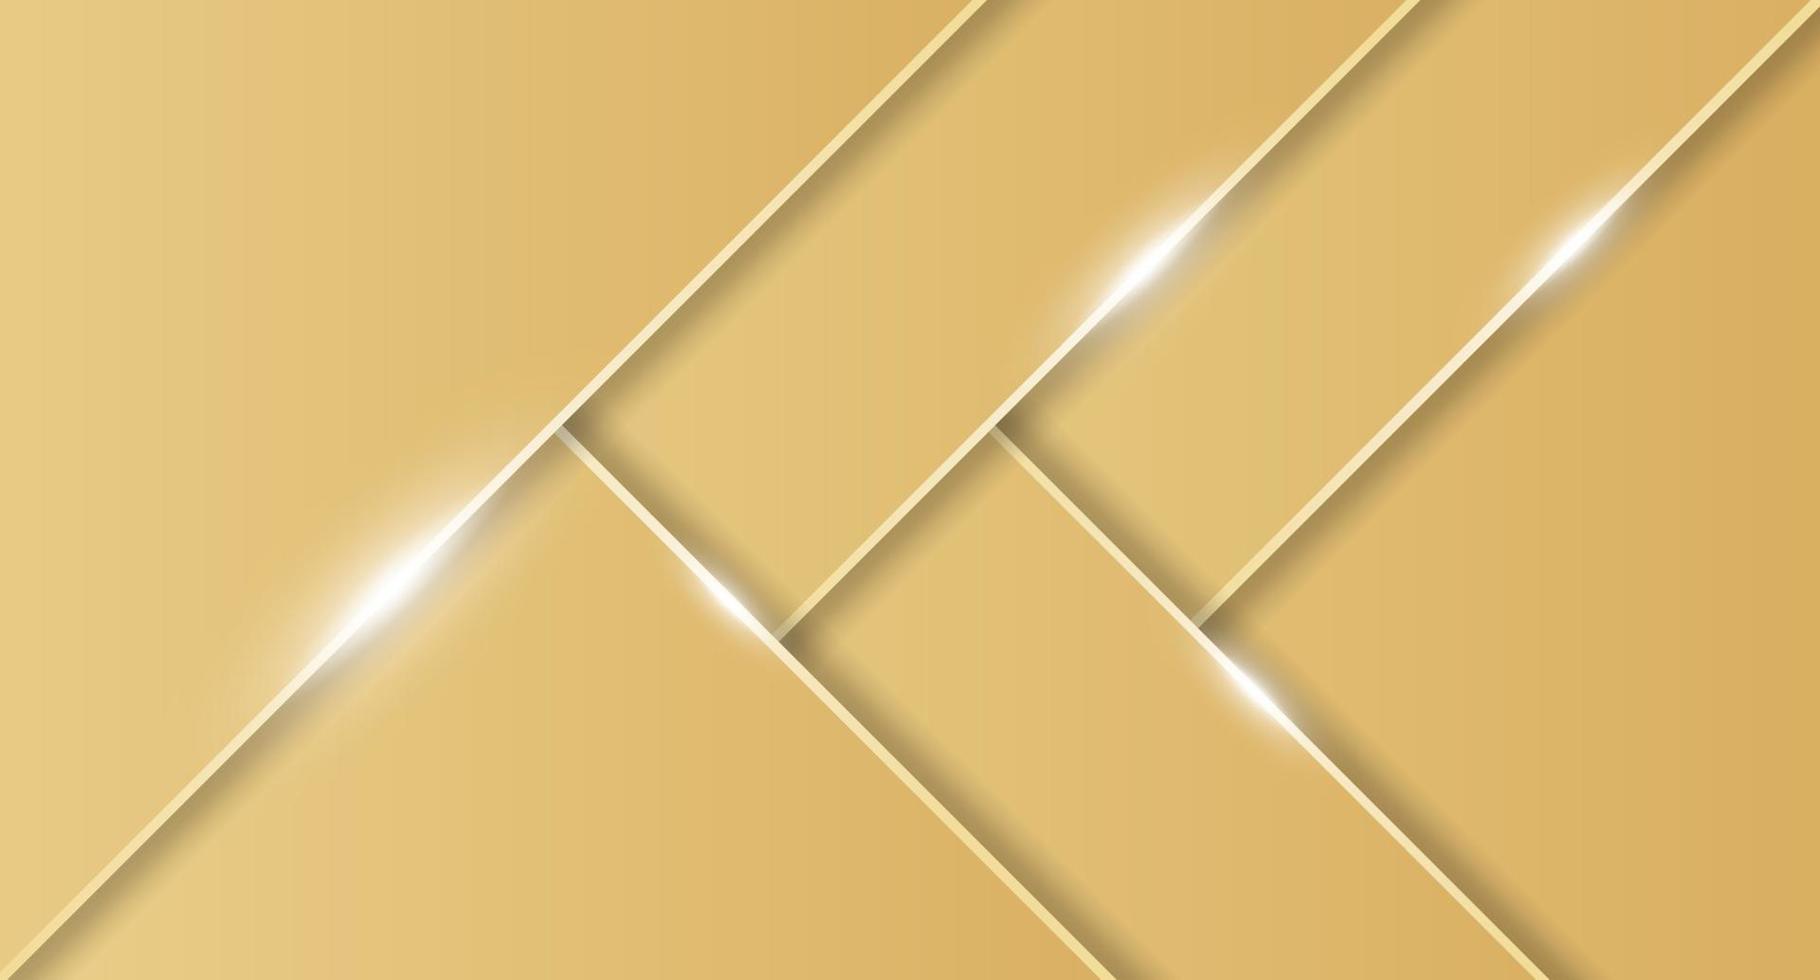 Abstract gold background with lines and shine effect. Luxury abstract gold background. Vector illustration